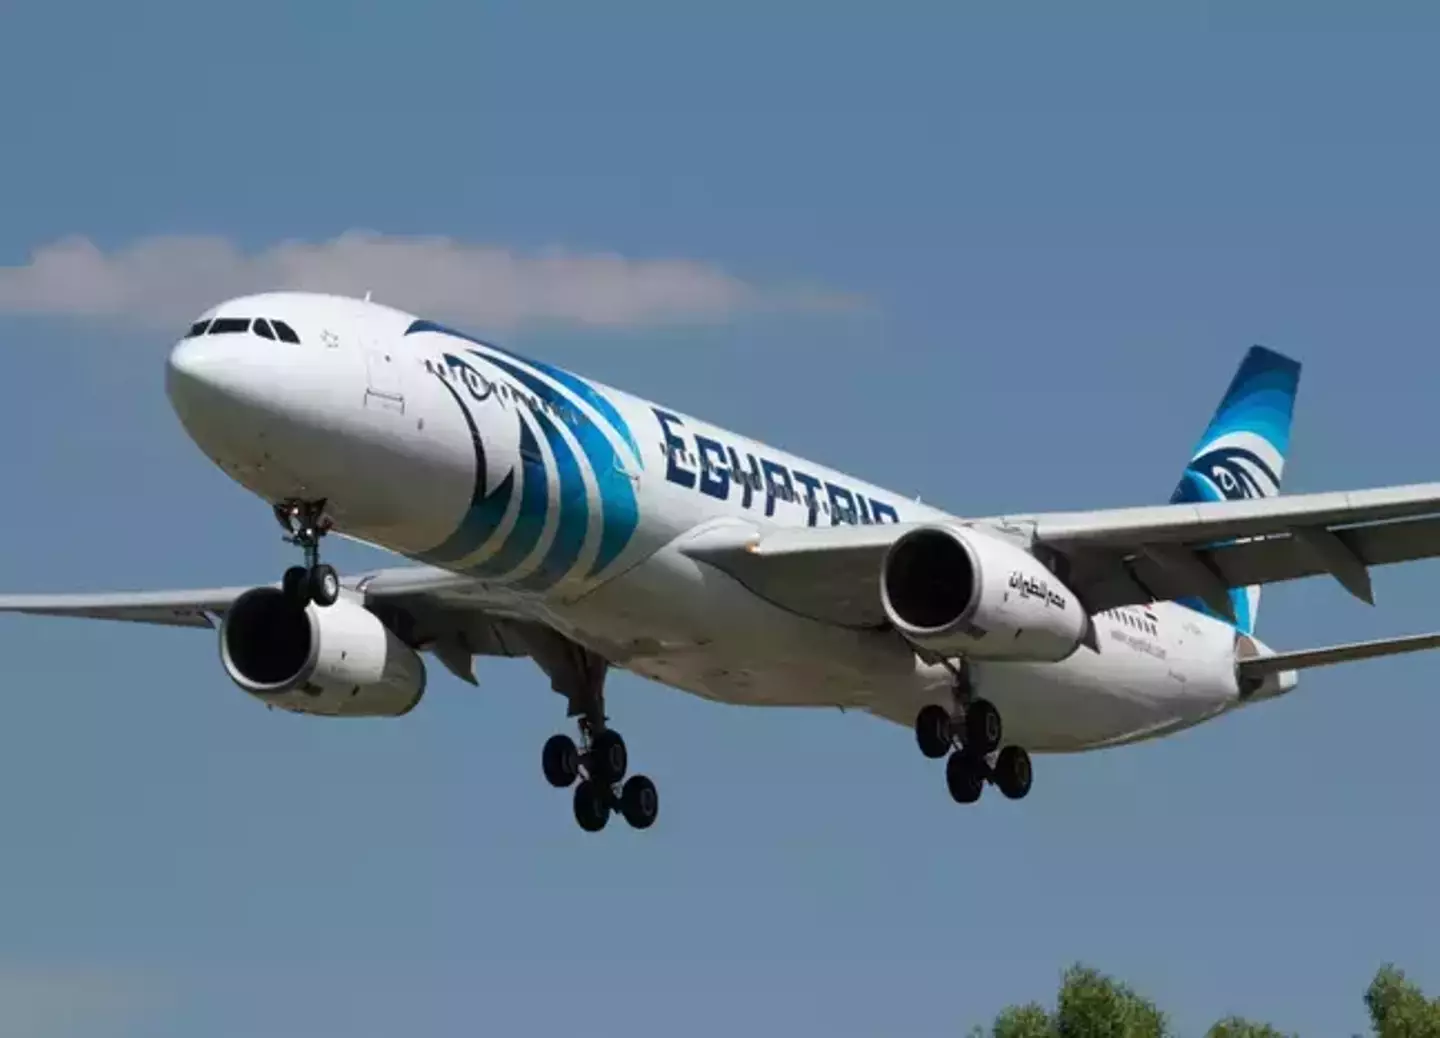 Nobody on board the Egyptair flight was harmed, with all hostages eventually let go.